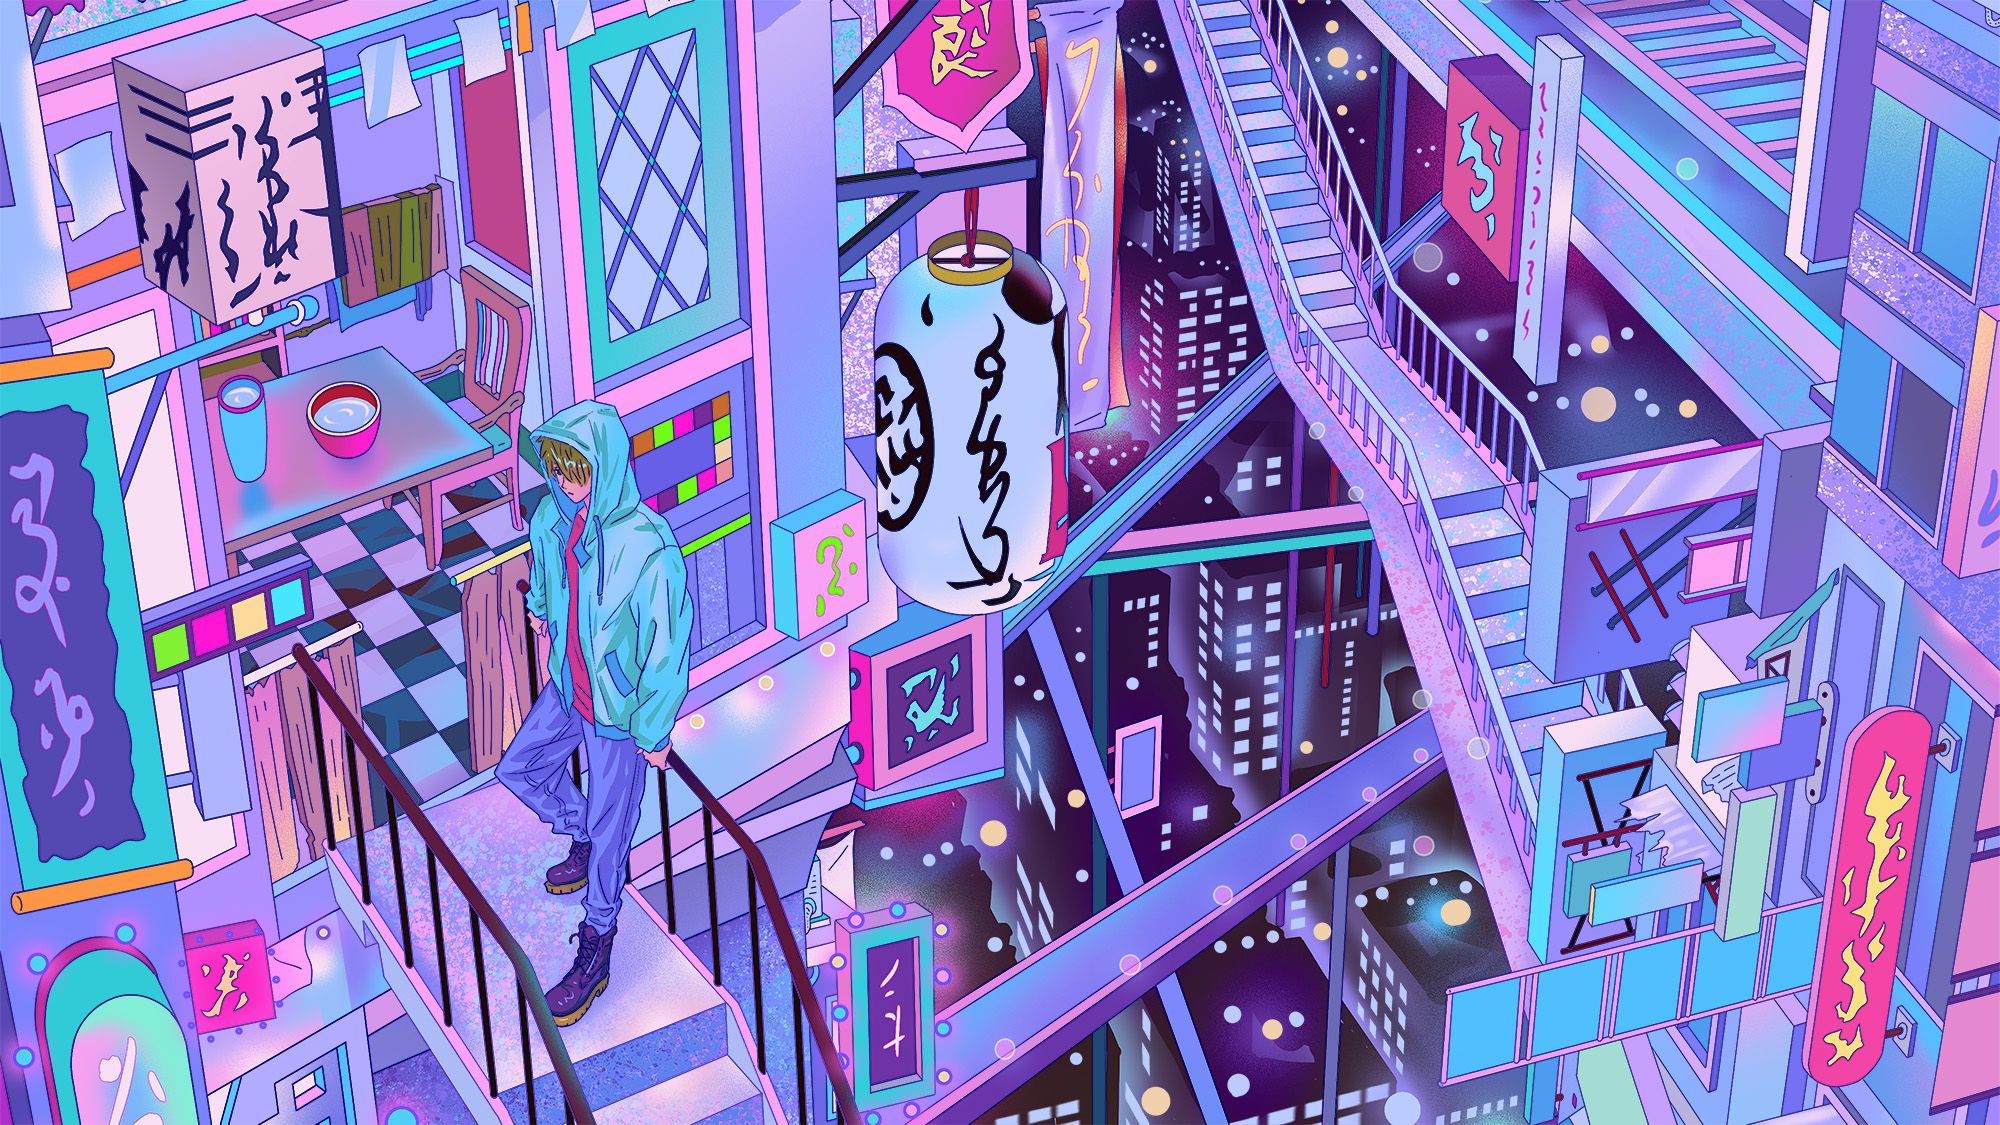 Illustration of Japanese city with city lights and staircases. Man stands on landing of staircase outside with hooded sweatshirt and blue timberland boots on.